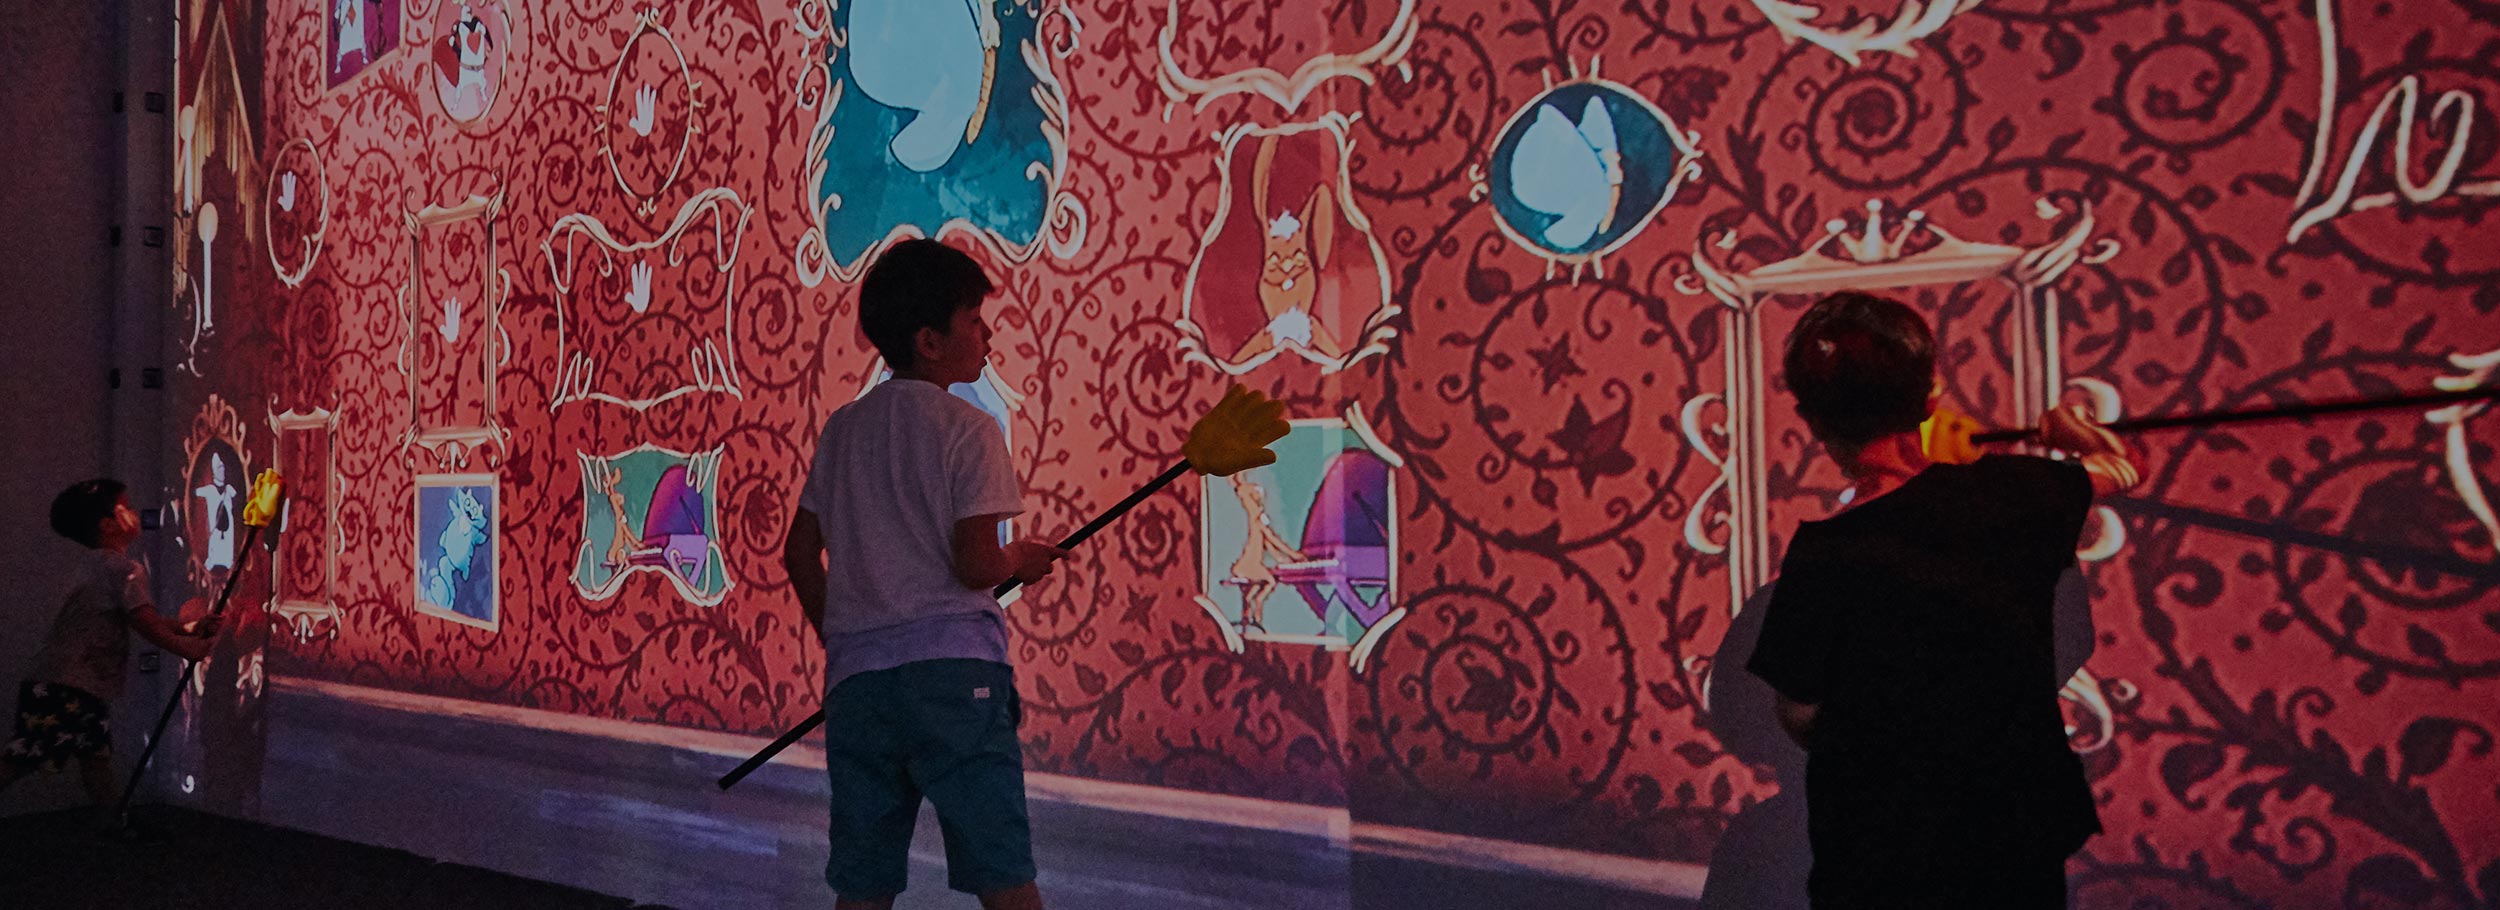 Alice in wonderland uses mapping and interactive technologies